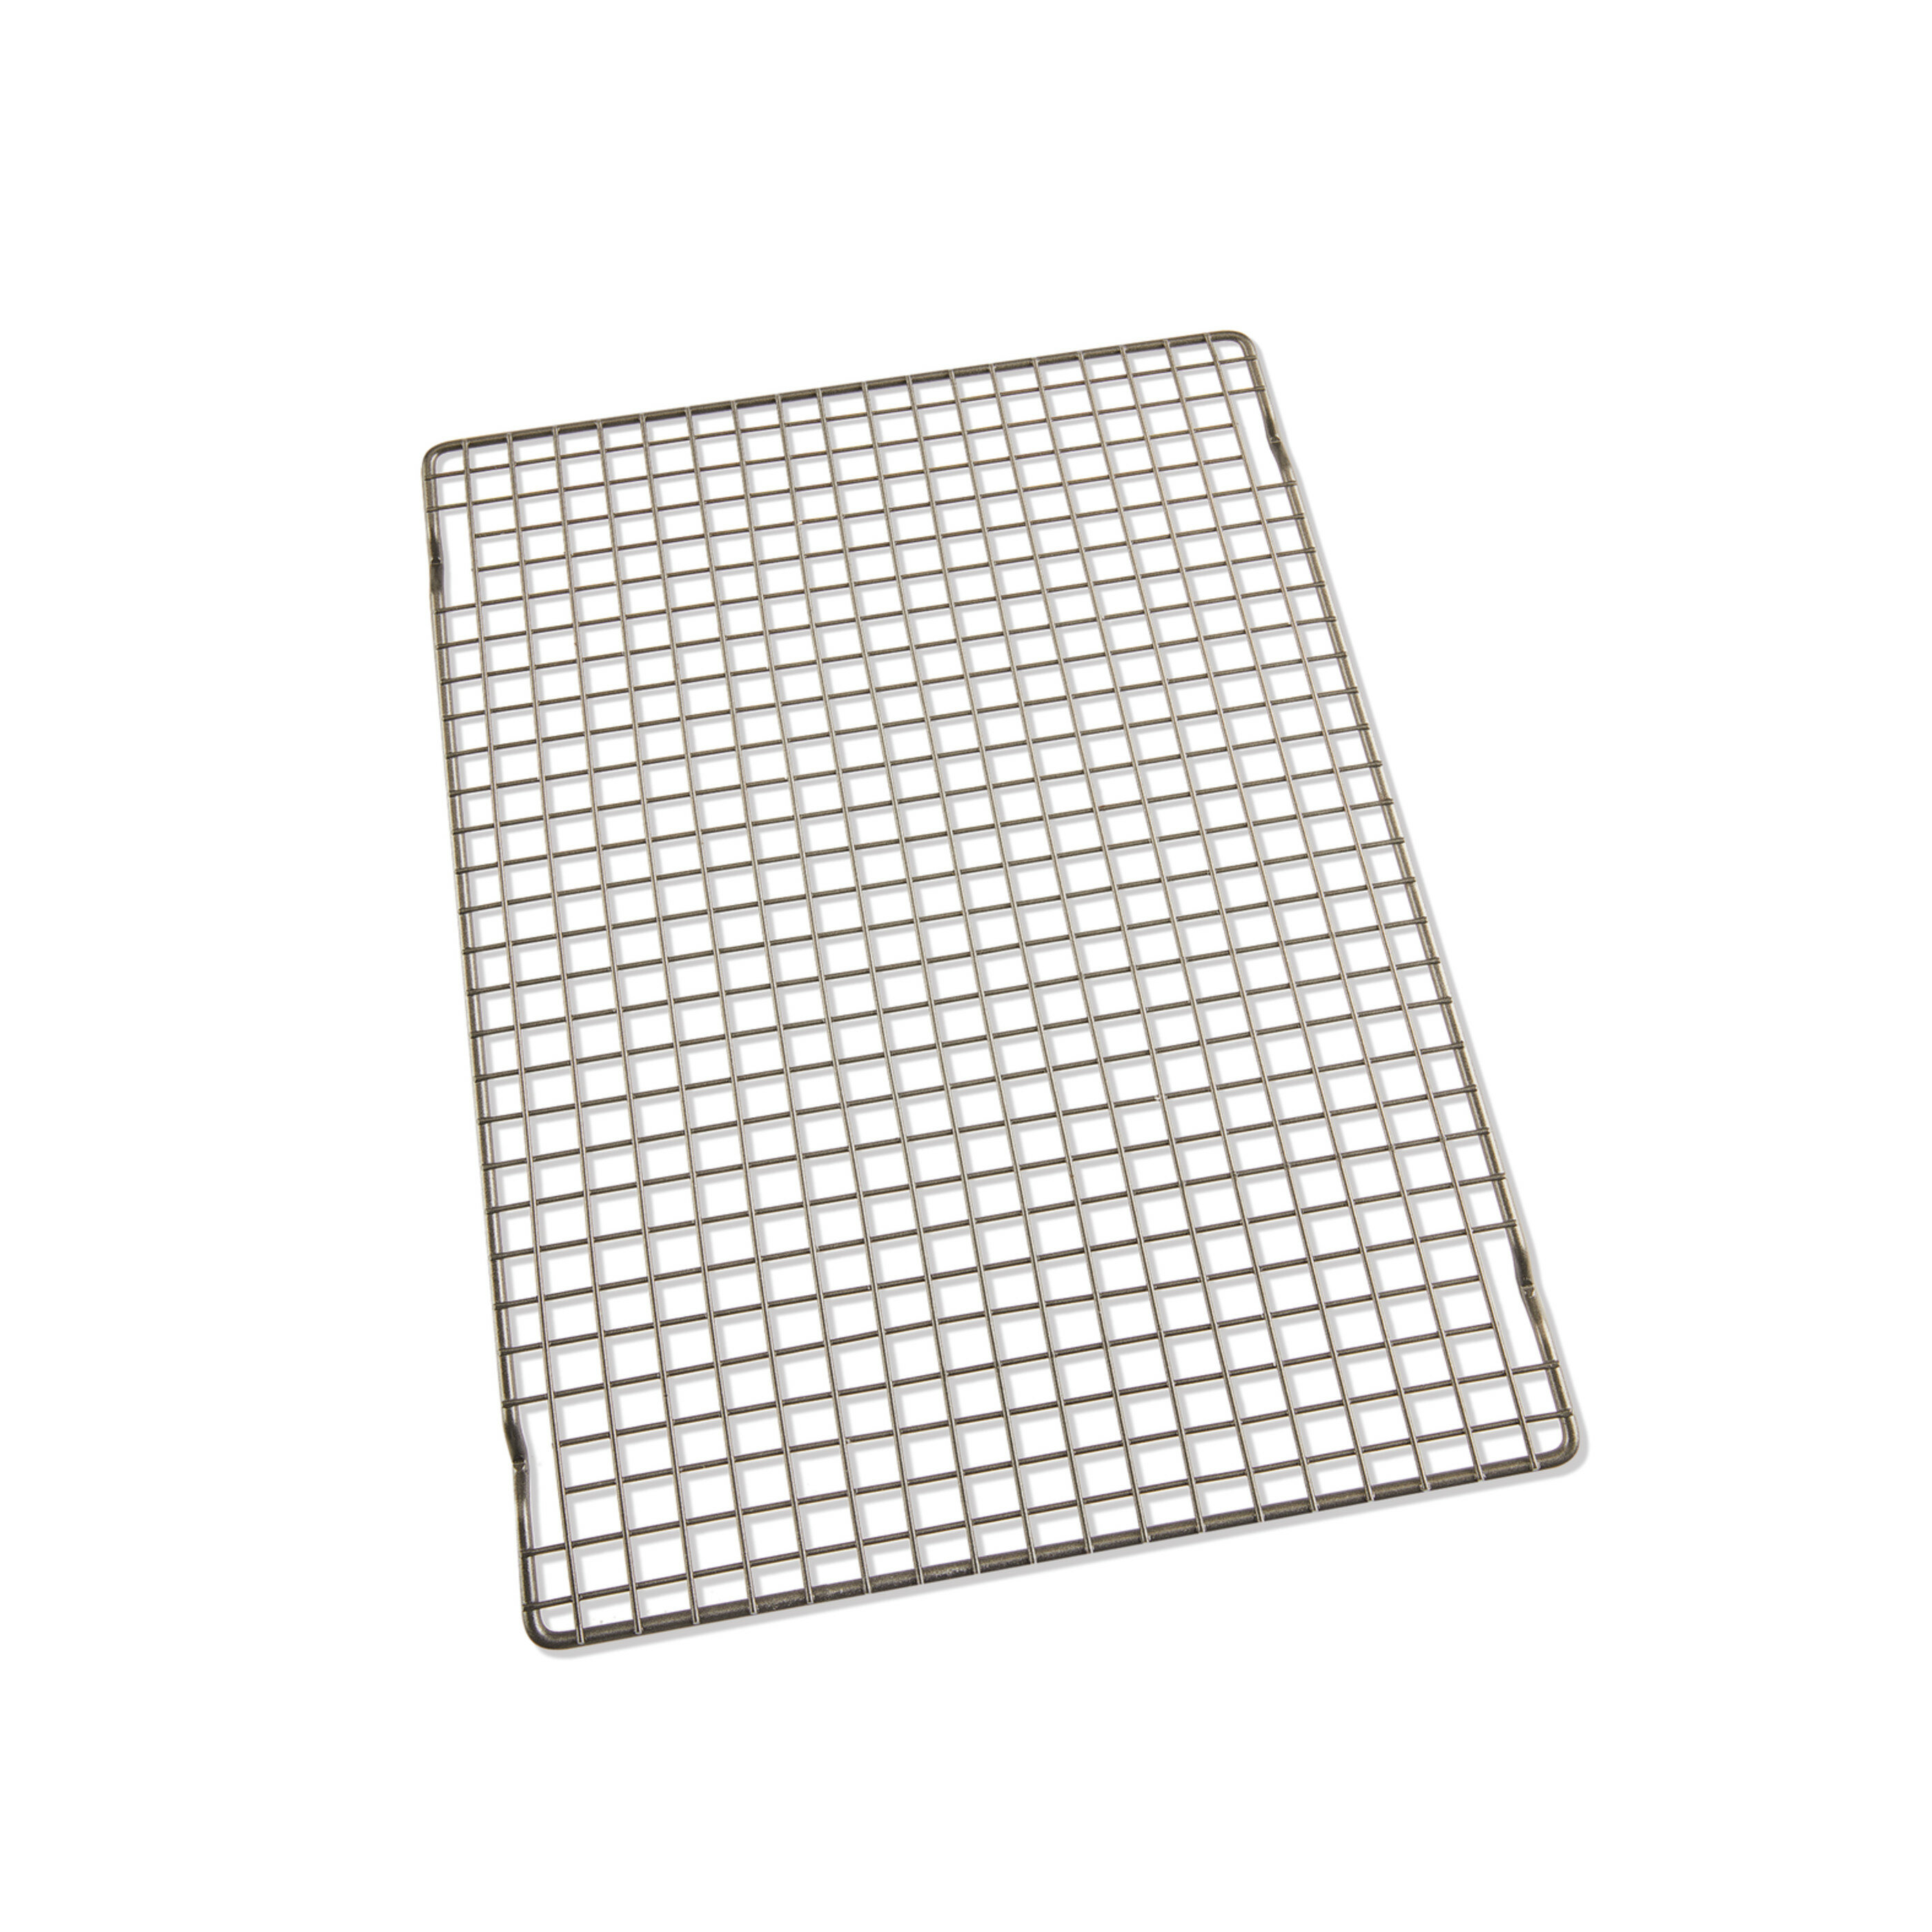 All-Clad Tri-Ply 14" x 17" Stainless-Steel Baking Sheet w/Non-Stick Cooling Rack